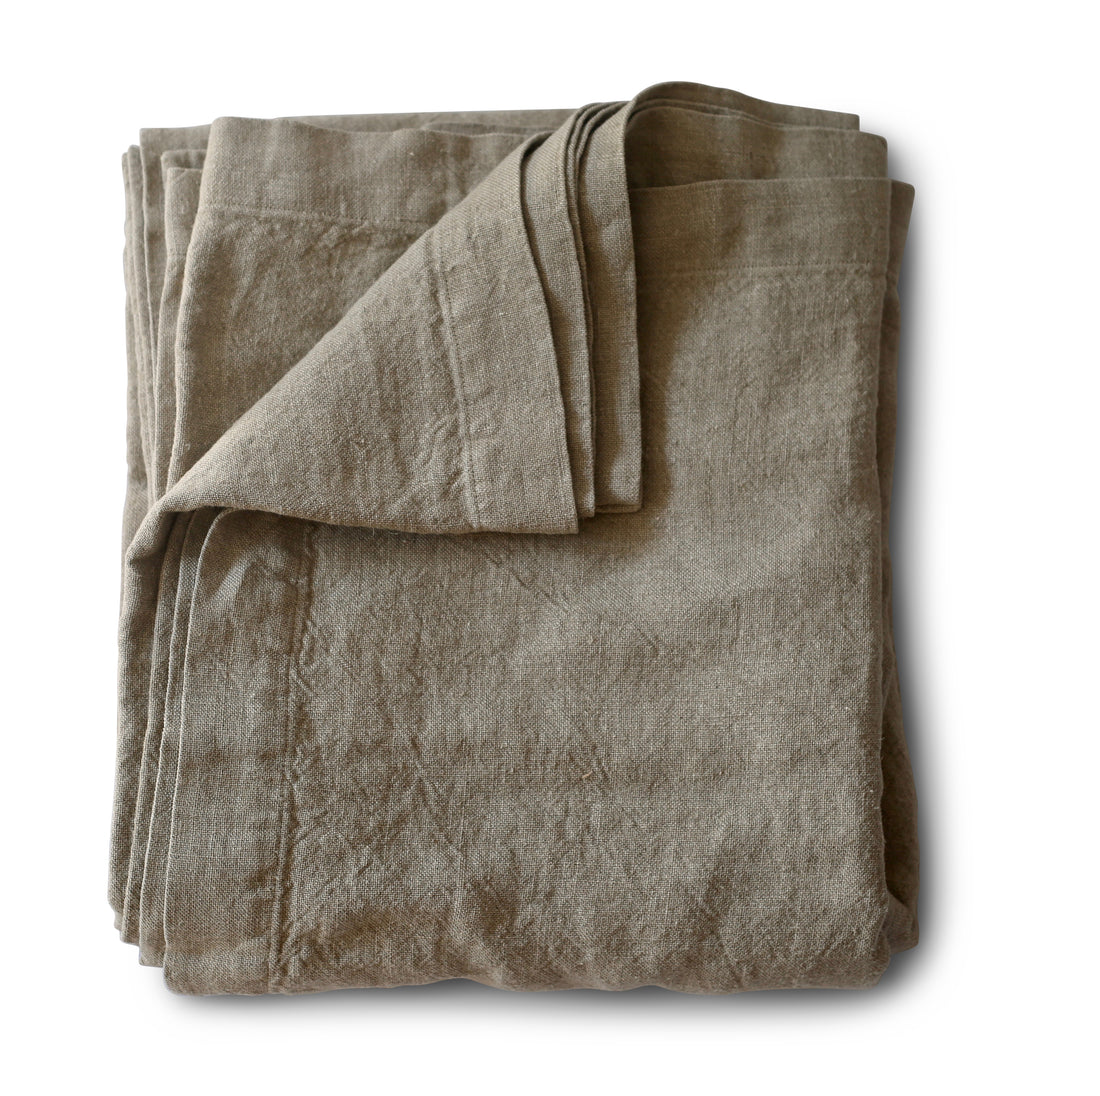 Evangeline linen, natural color, folded against a white background. 100% linen A substantial weight. Two classic colorways available in Full/Queen and King sizes.